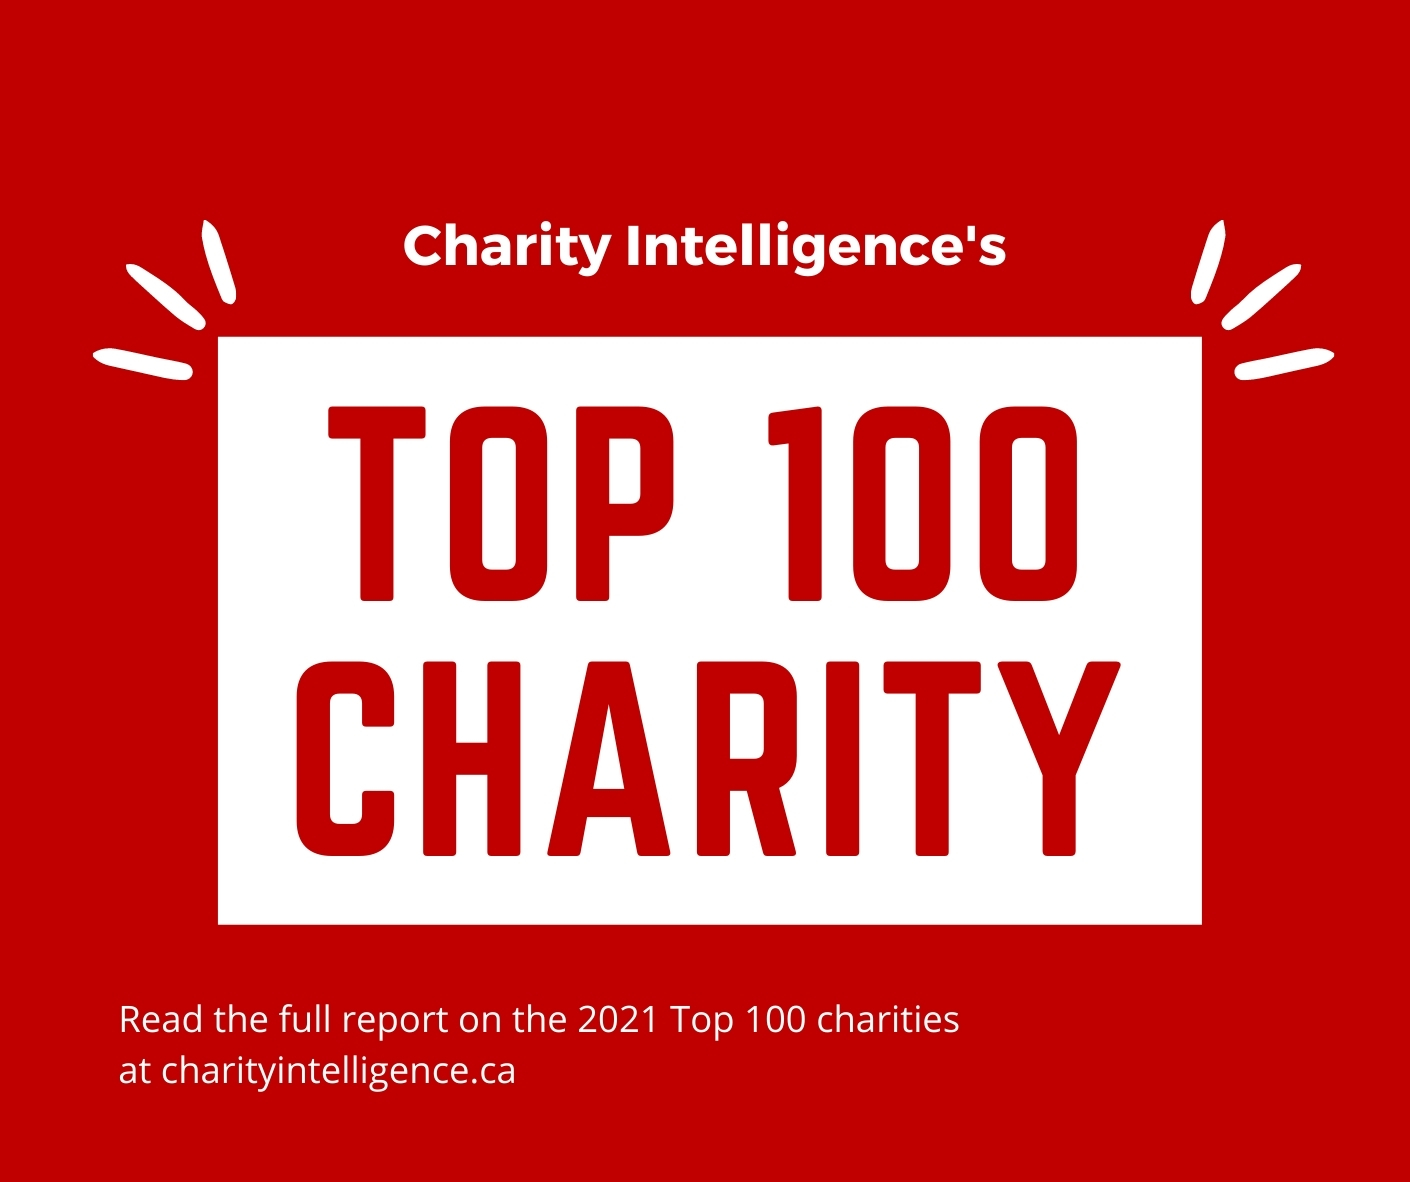 Charity Intelligence top 100 charity